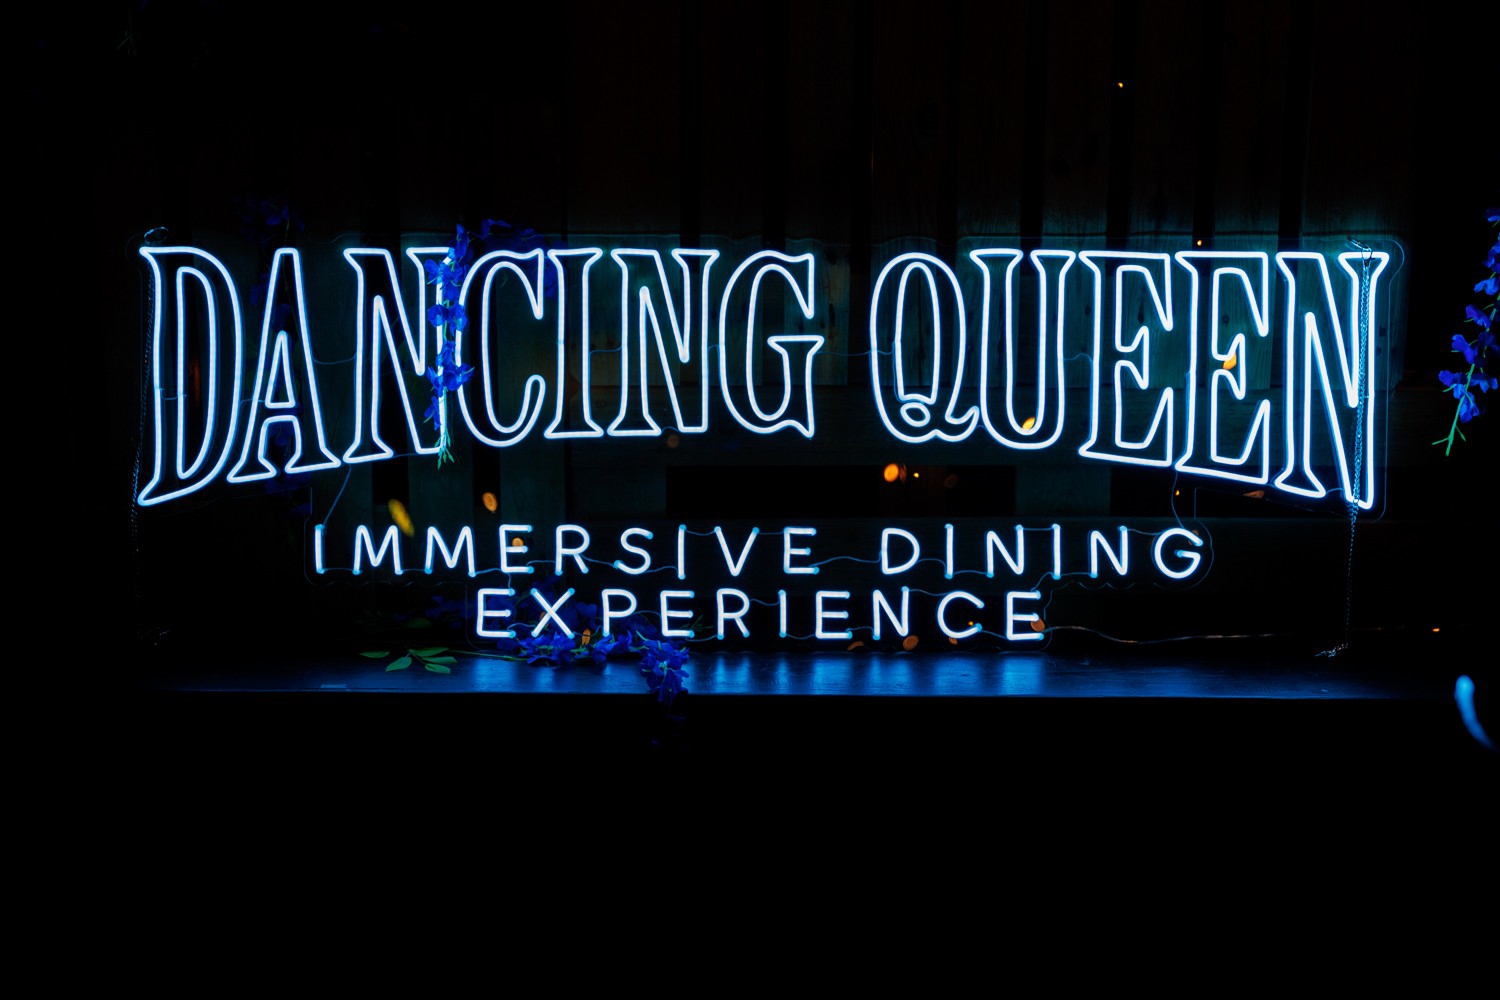 THE DANCING QUEEN: BOAT CRUISE & DINING EXPERIENCE (Melbourne)